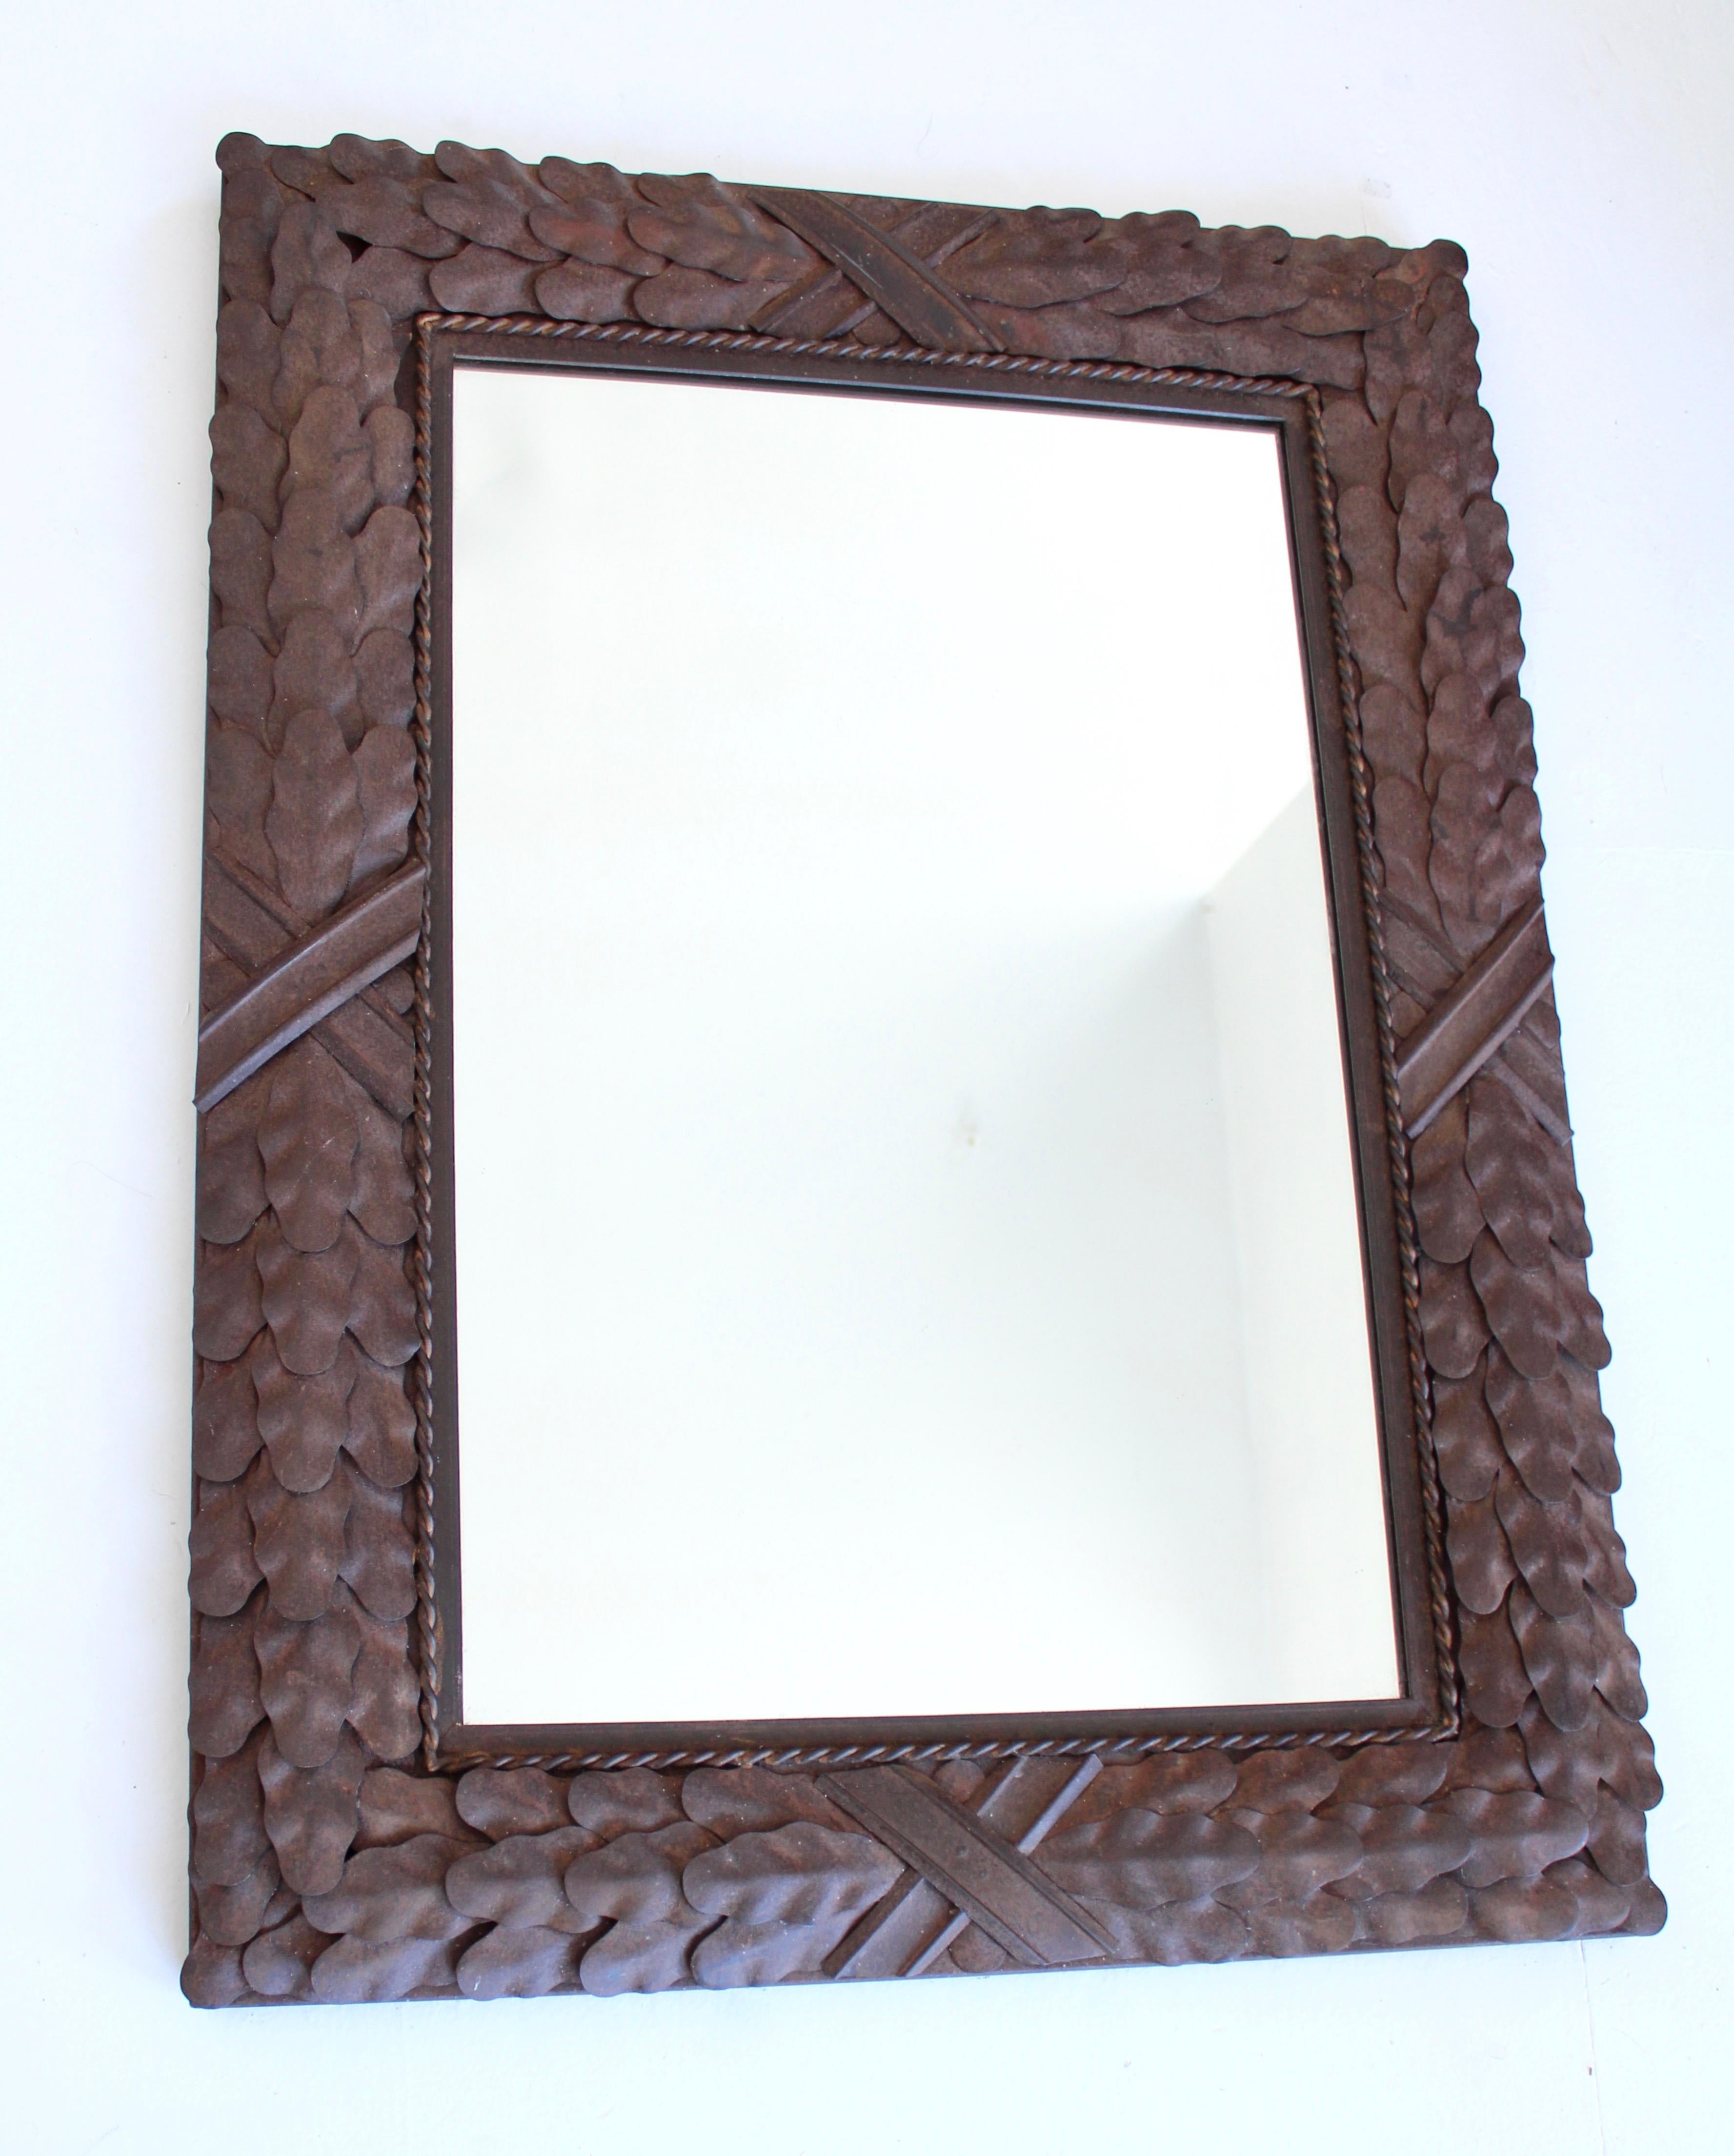 Neo classical iron Italian rusted patina mirror. Acanthus leaf details on the border with rope motif and large X on all four sides. Remnants of gilding remain. 
The frame is mounted to very old wood which authenticates its vintage age. 
Circa 19th